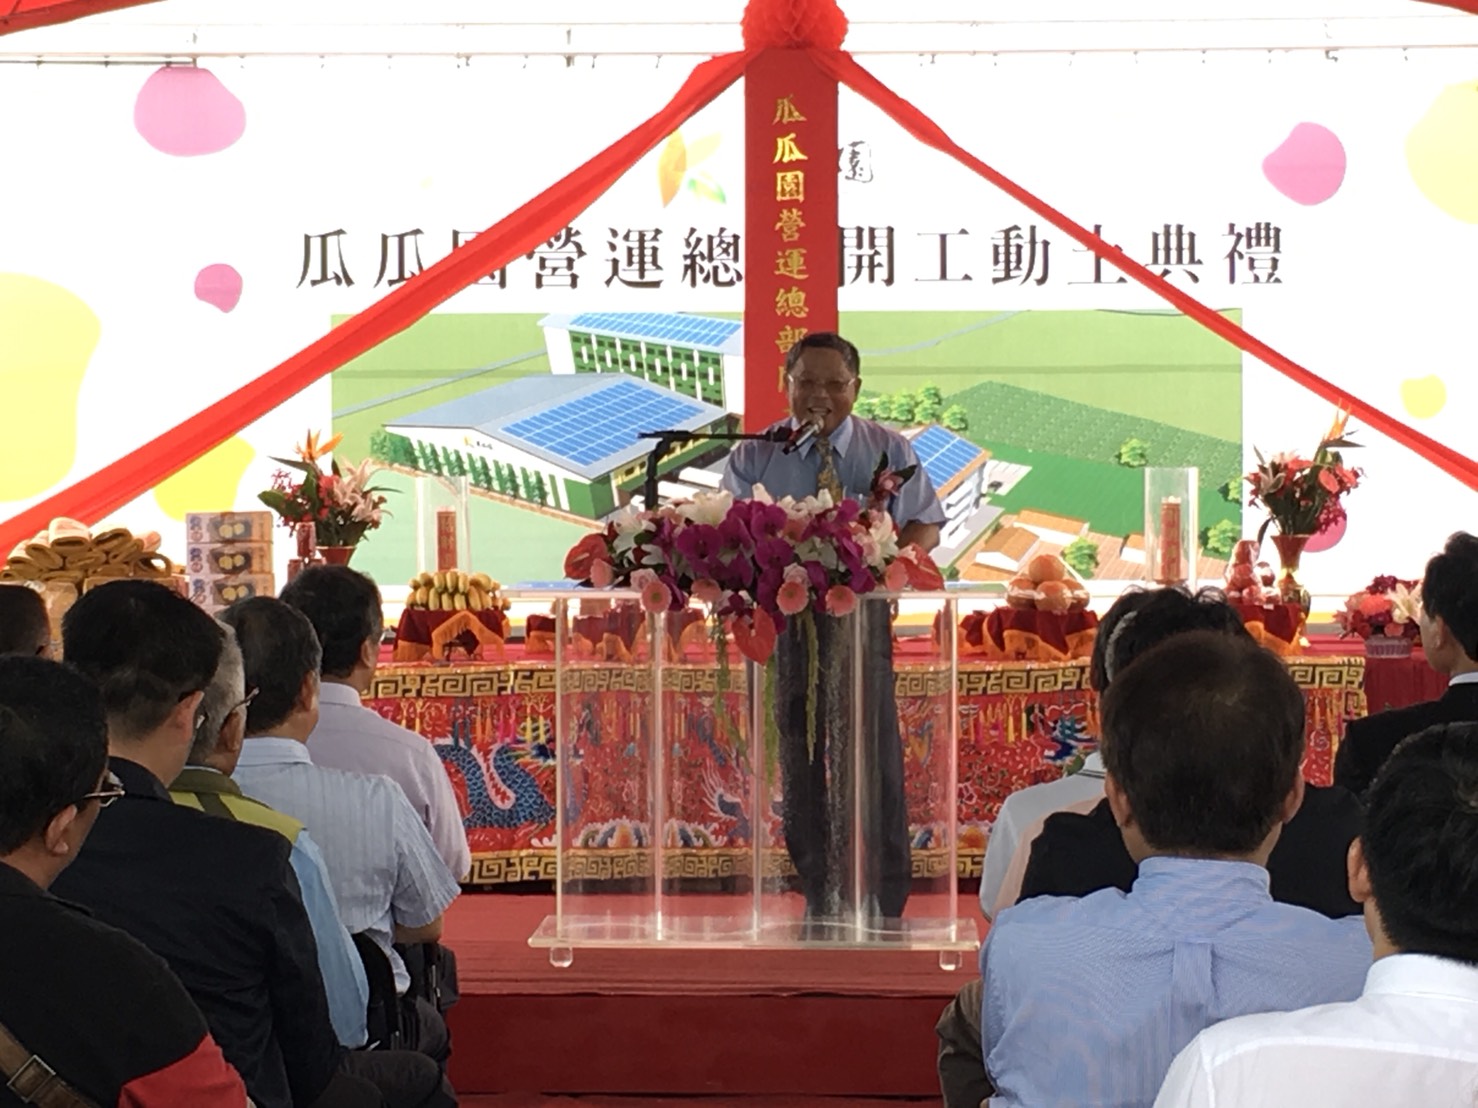 K. K. Orchard Guanmiao Plant Begins Construction, Promoting Local Development and Guaranteeing the Income of Farmers